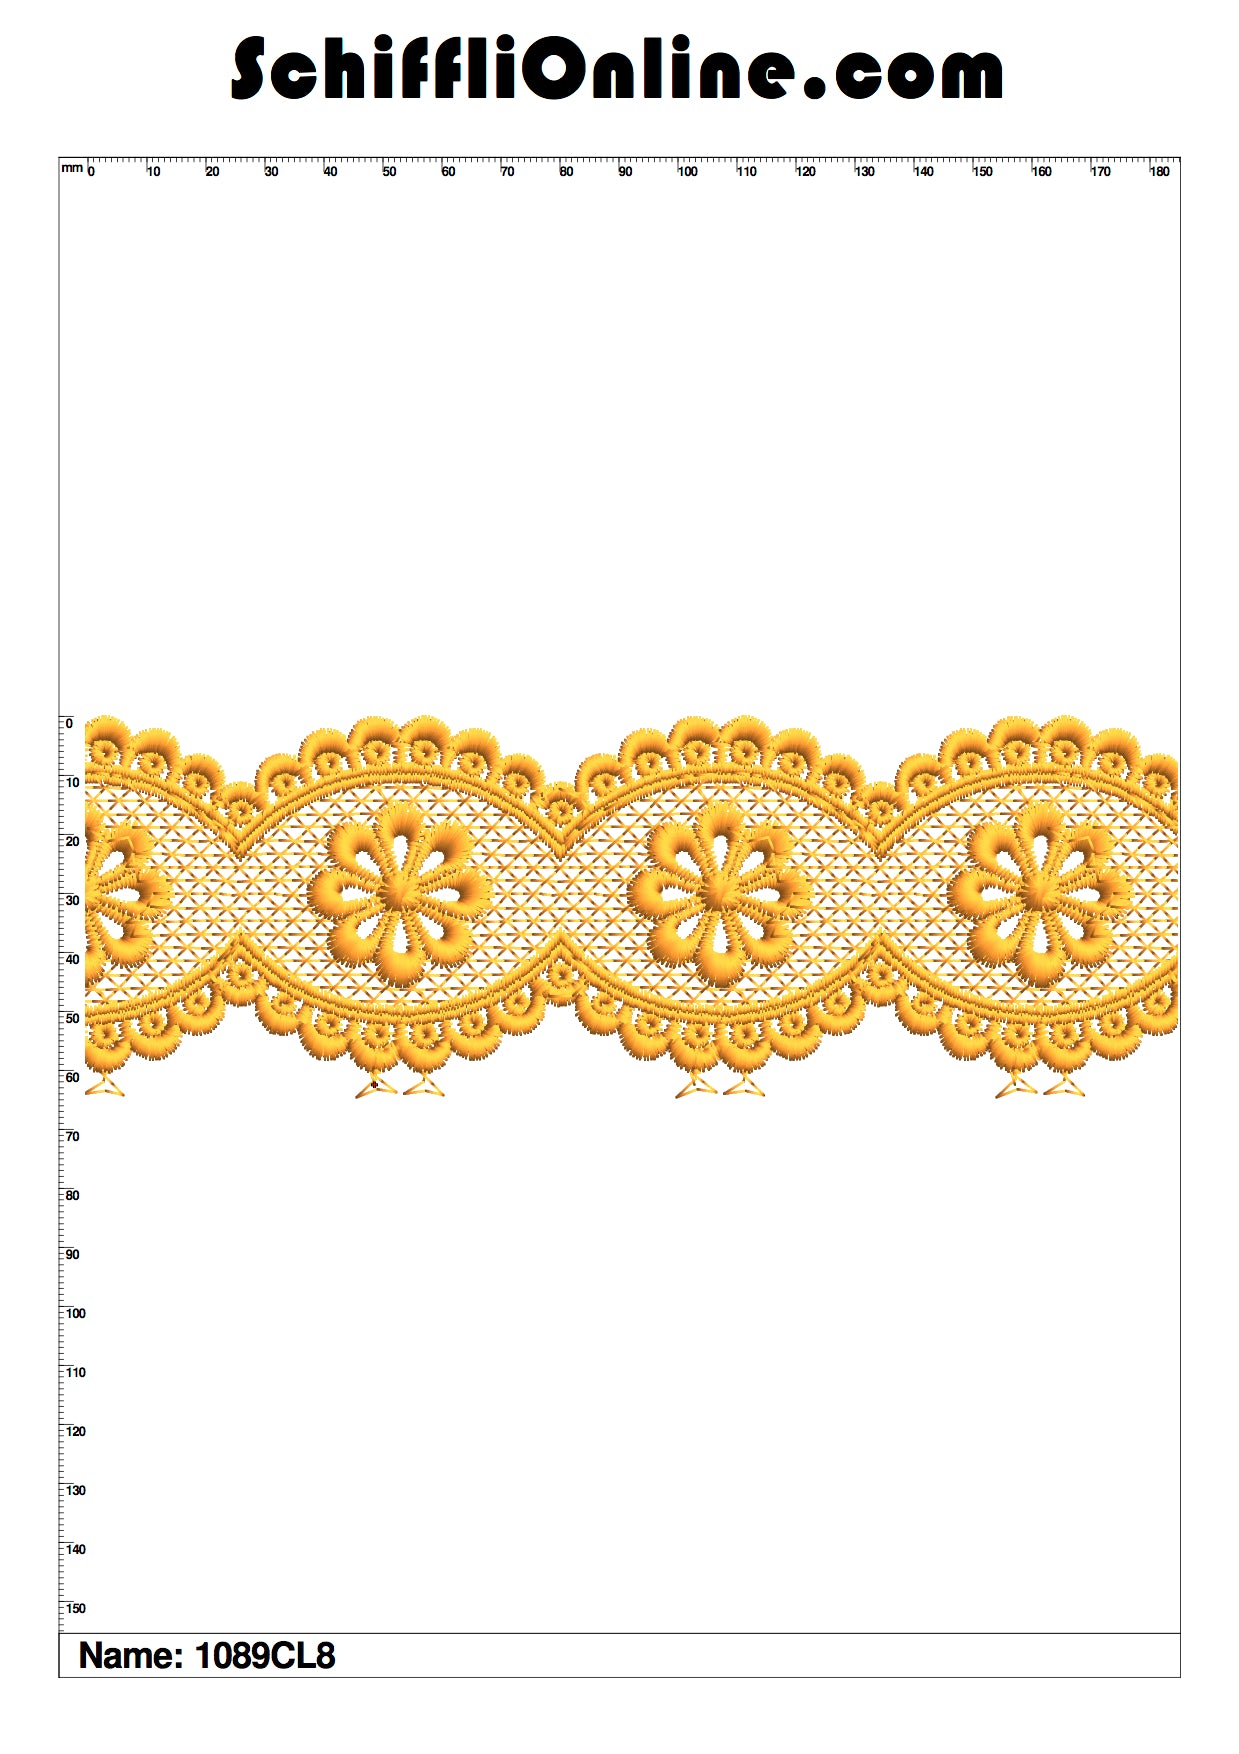 Book 133 CHEMICAL LACE 8X4 50 DESIGNS